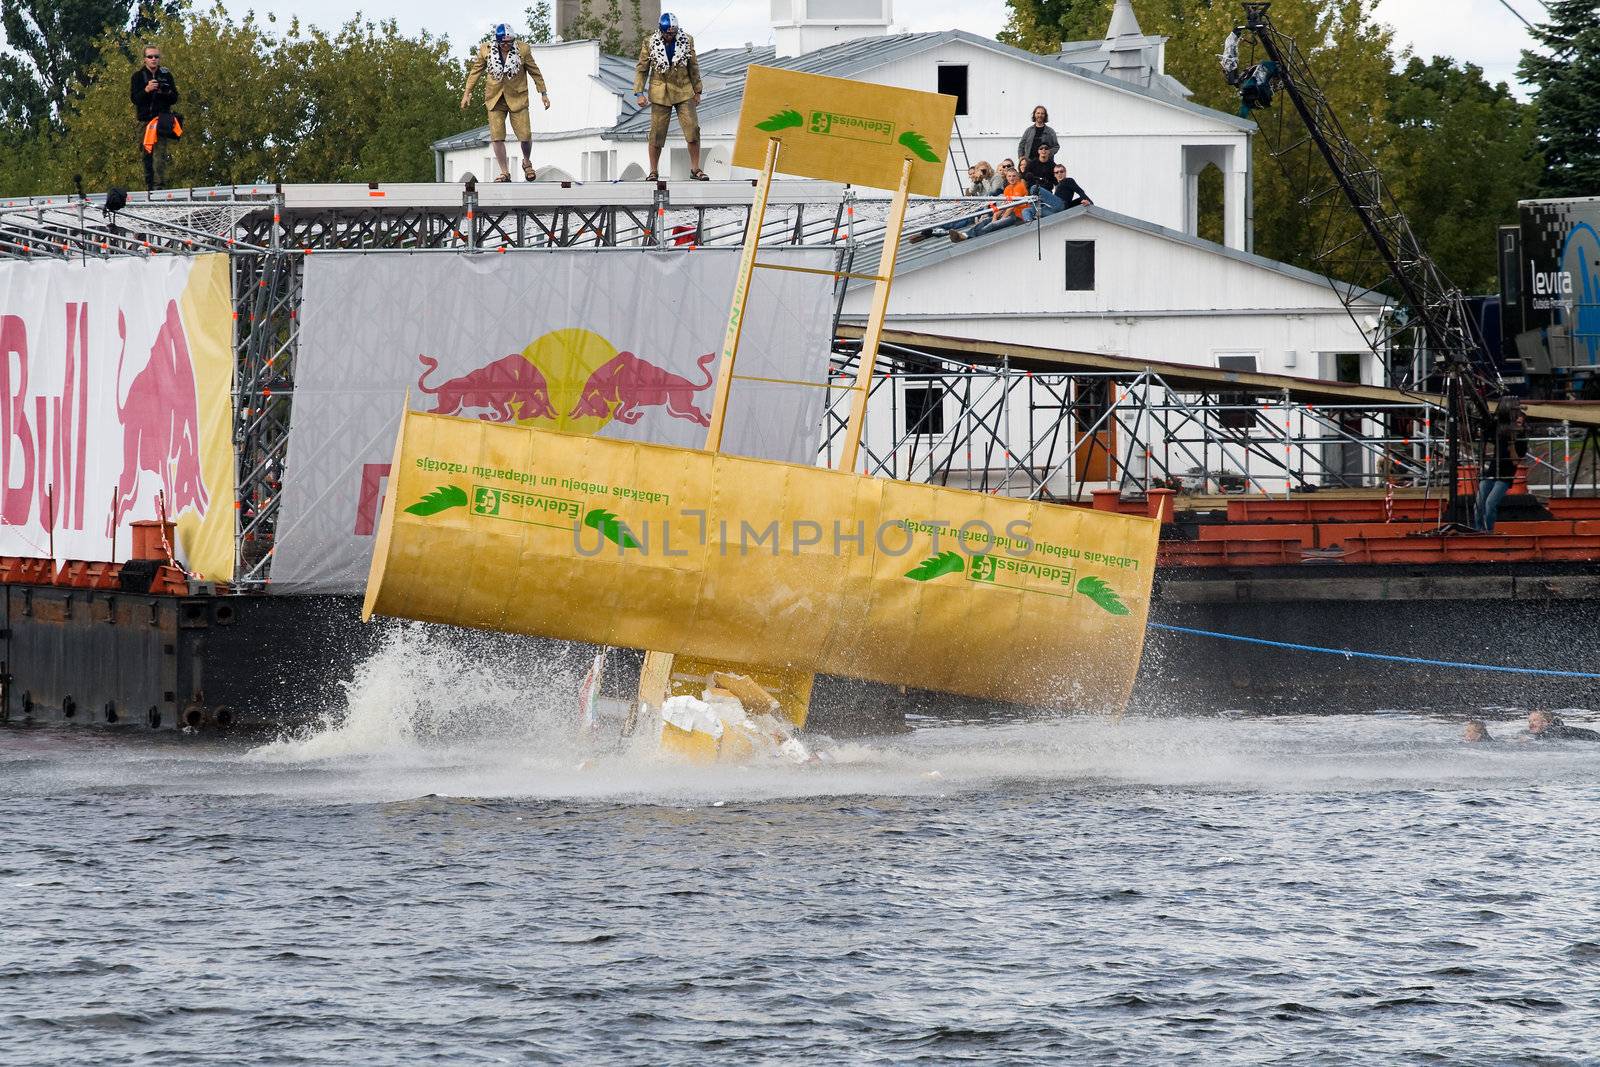 Flugtag competition in Riga by ints